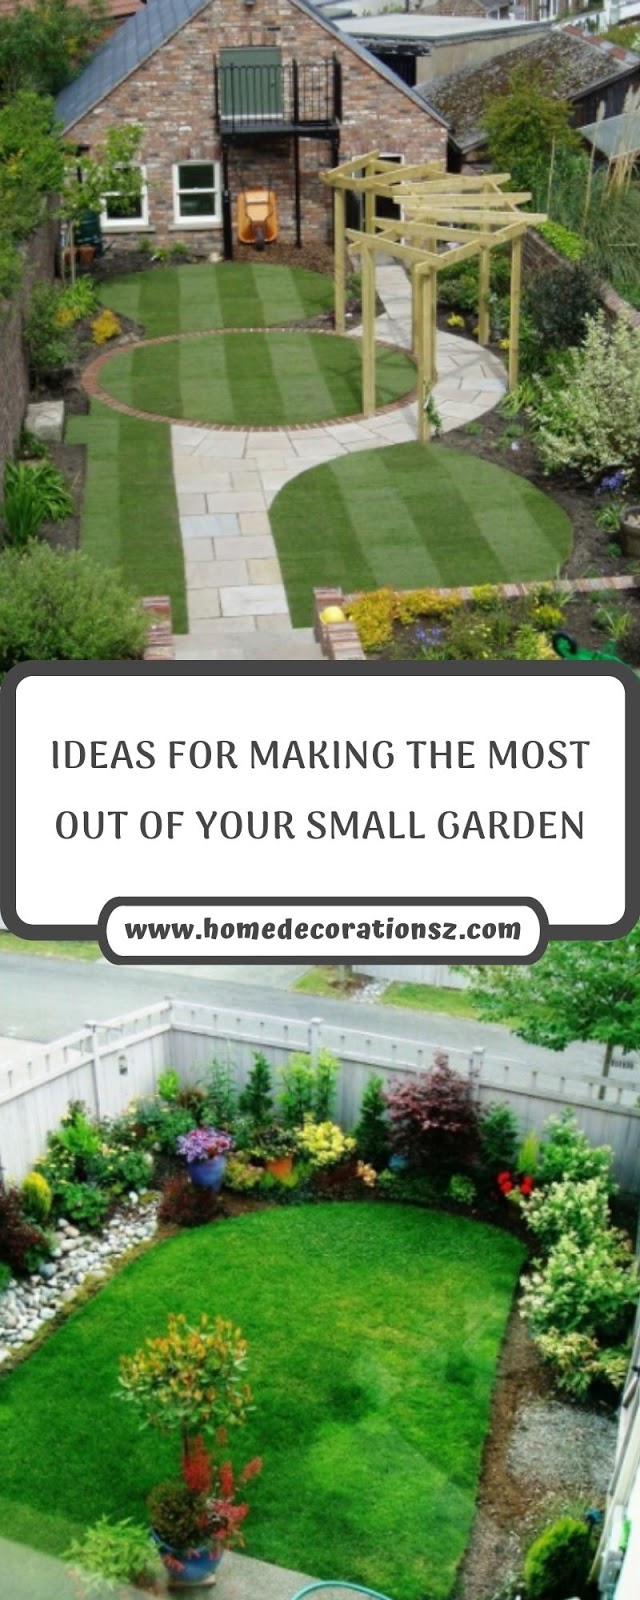 IDEAS FOR MAKING THE MOST OUT OF YOUR SMALL GARDEN